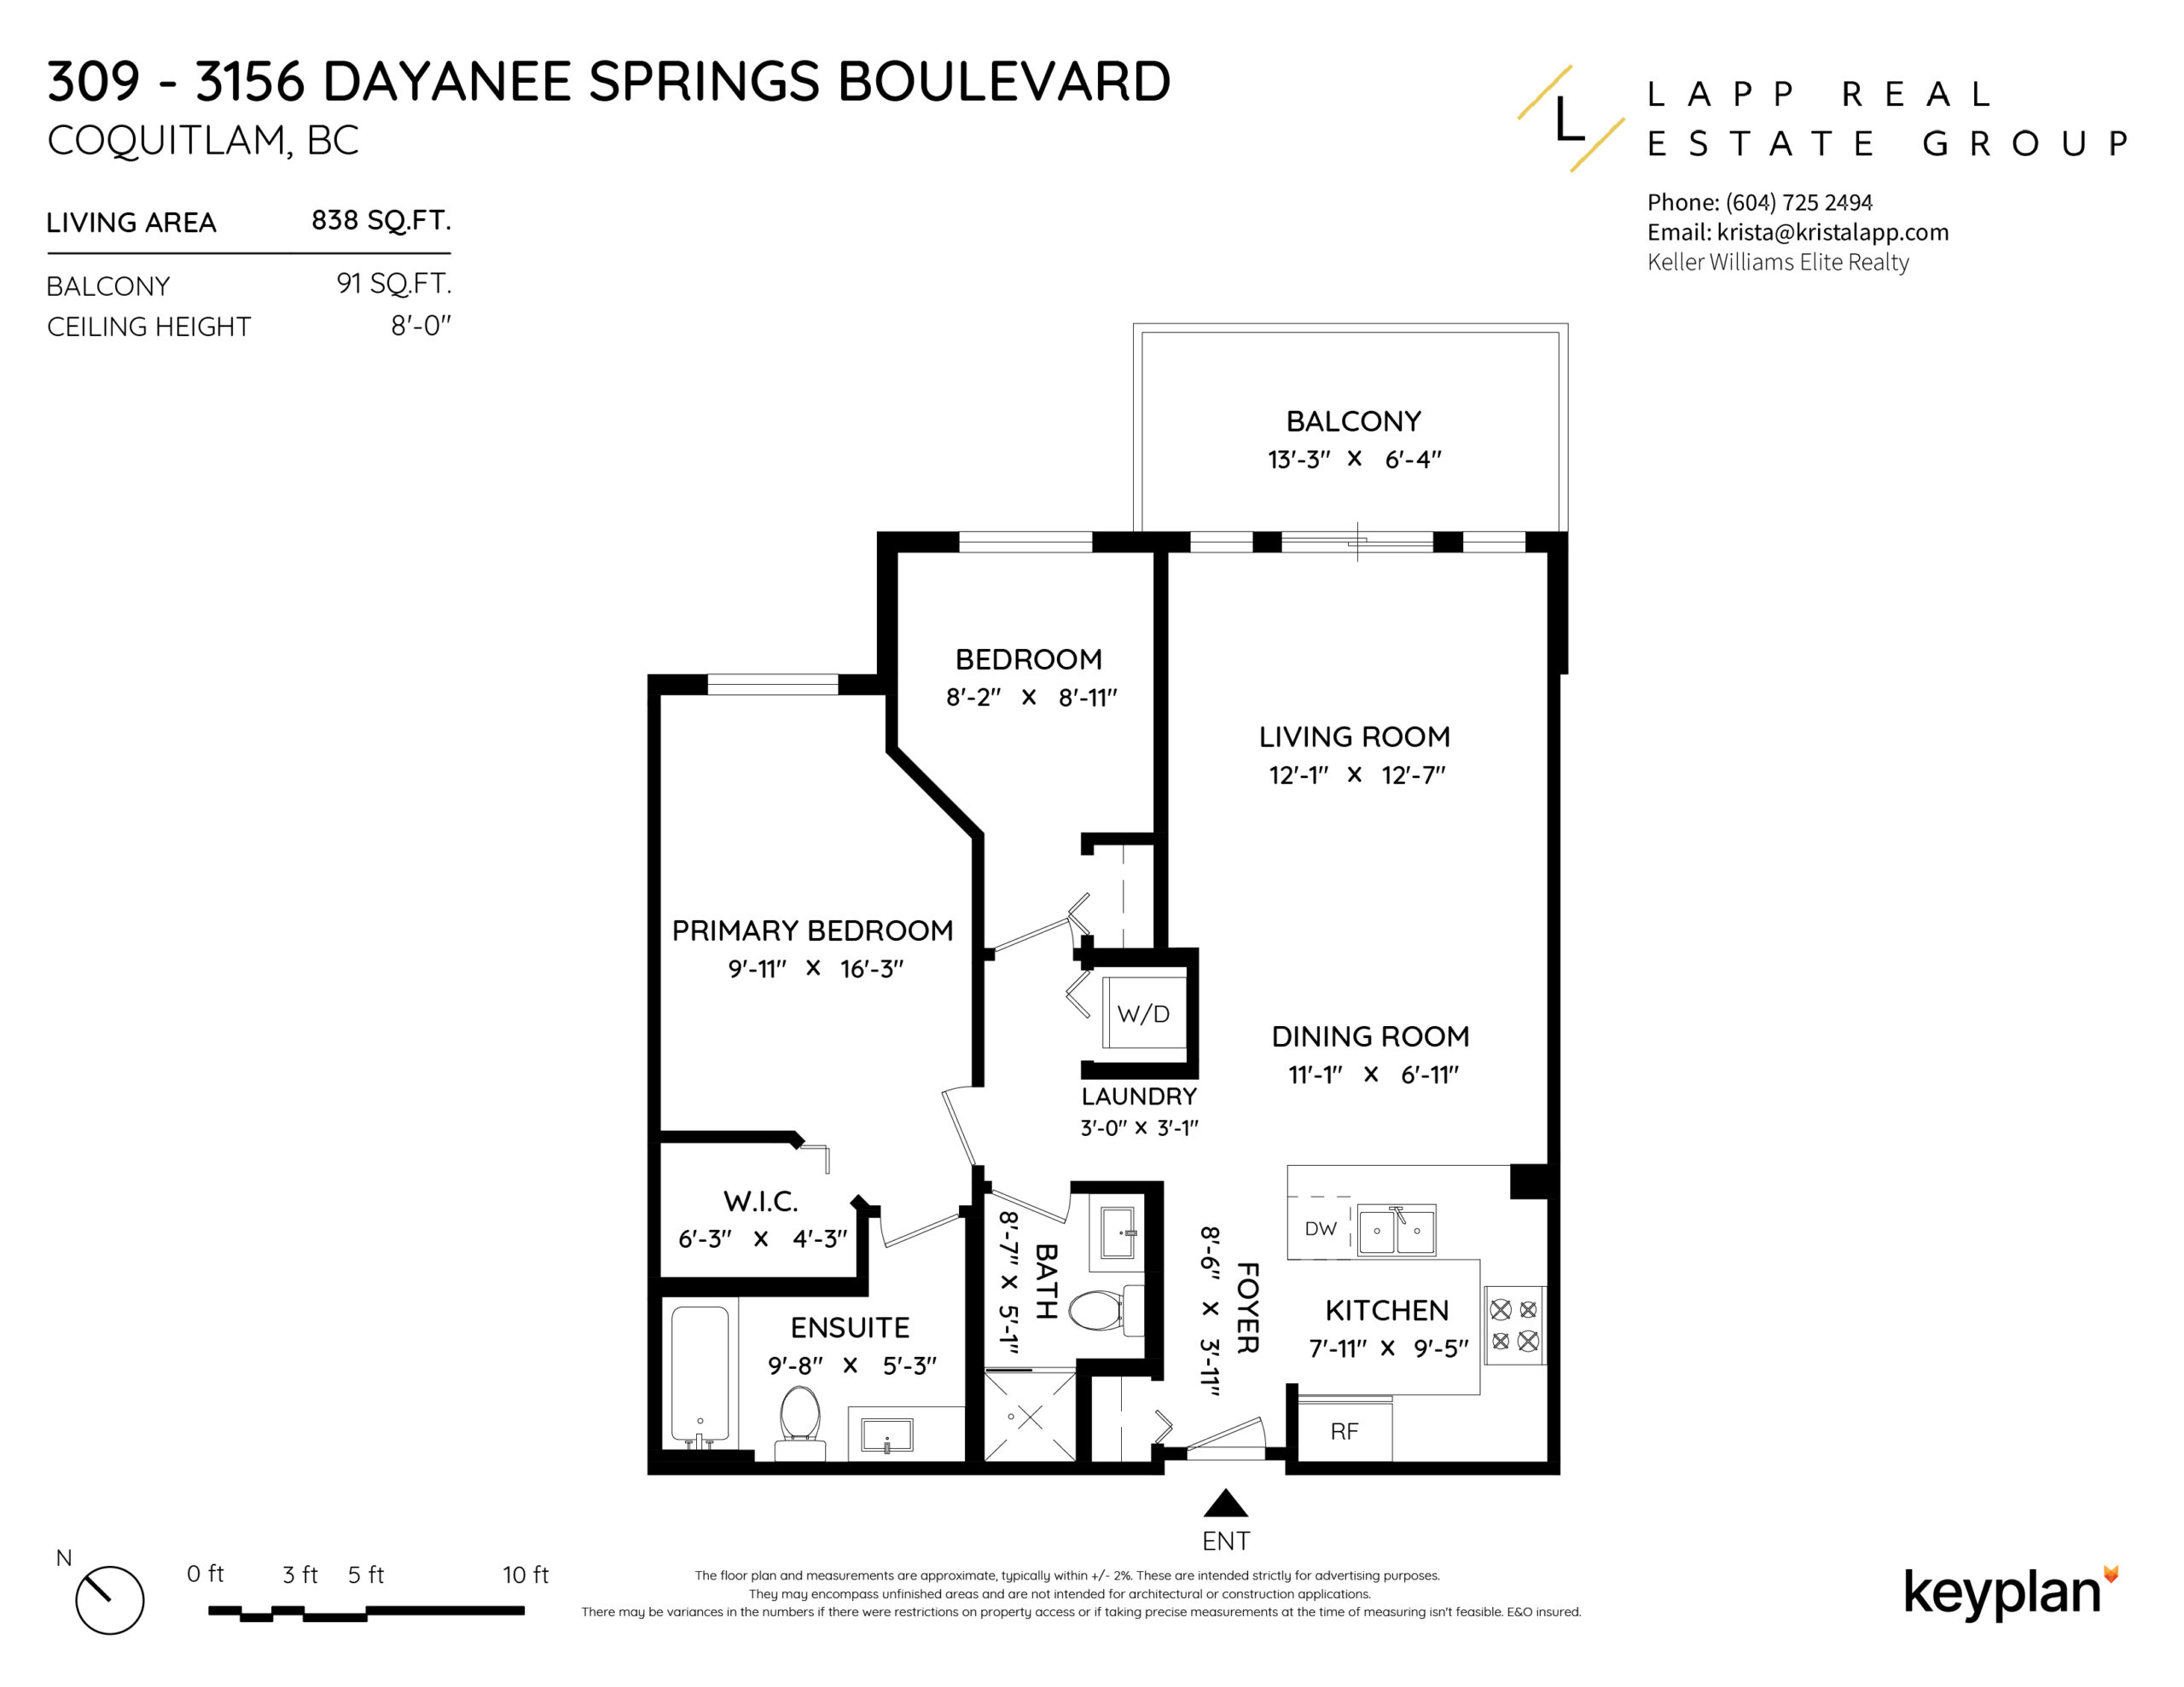 Westwood Plateau Condo for Sale Krista Lapp Unit 309 3156 Dayanee Springs Blvd Coquitlam-Layout Floor plan